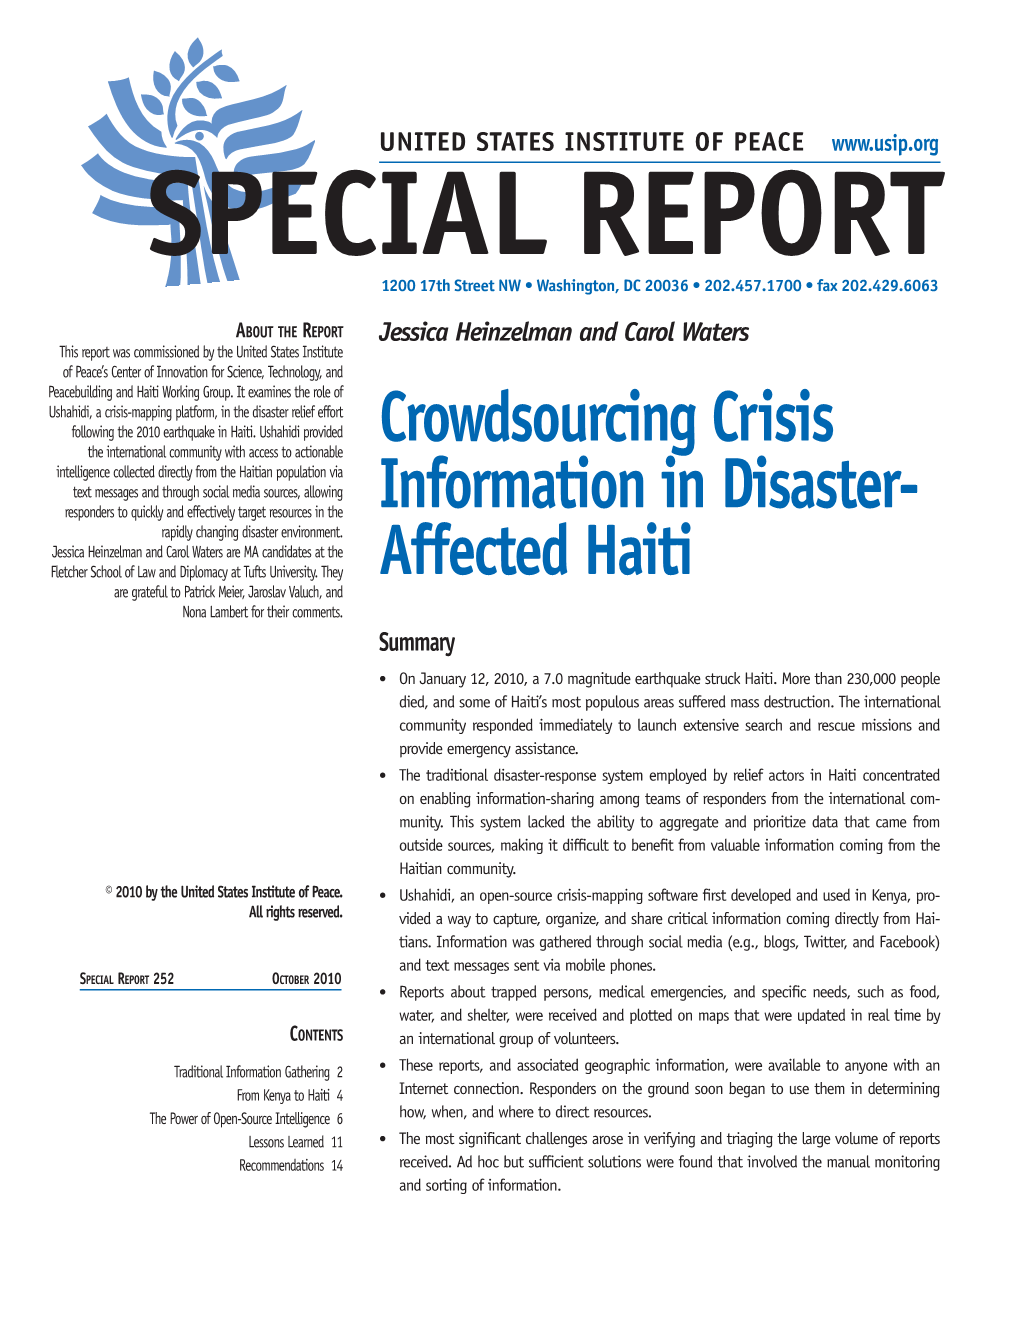 Crowdsourcing Crisis Information in Disaster-Affected Haiti